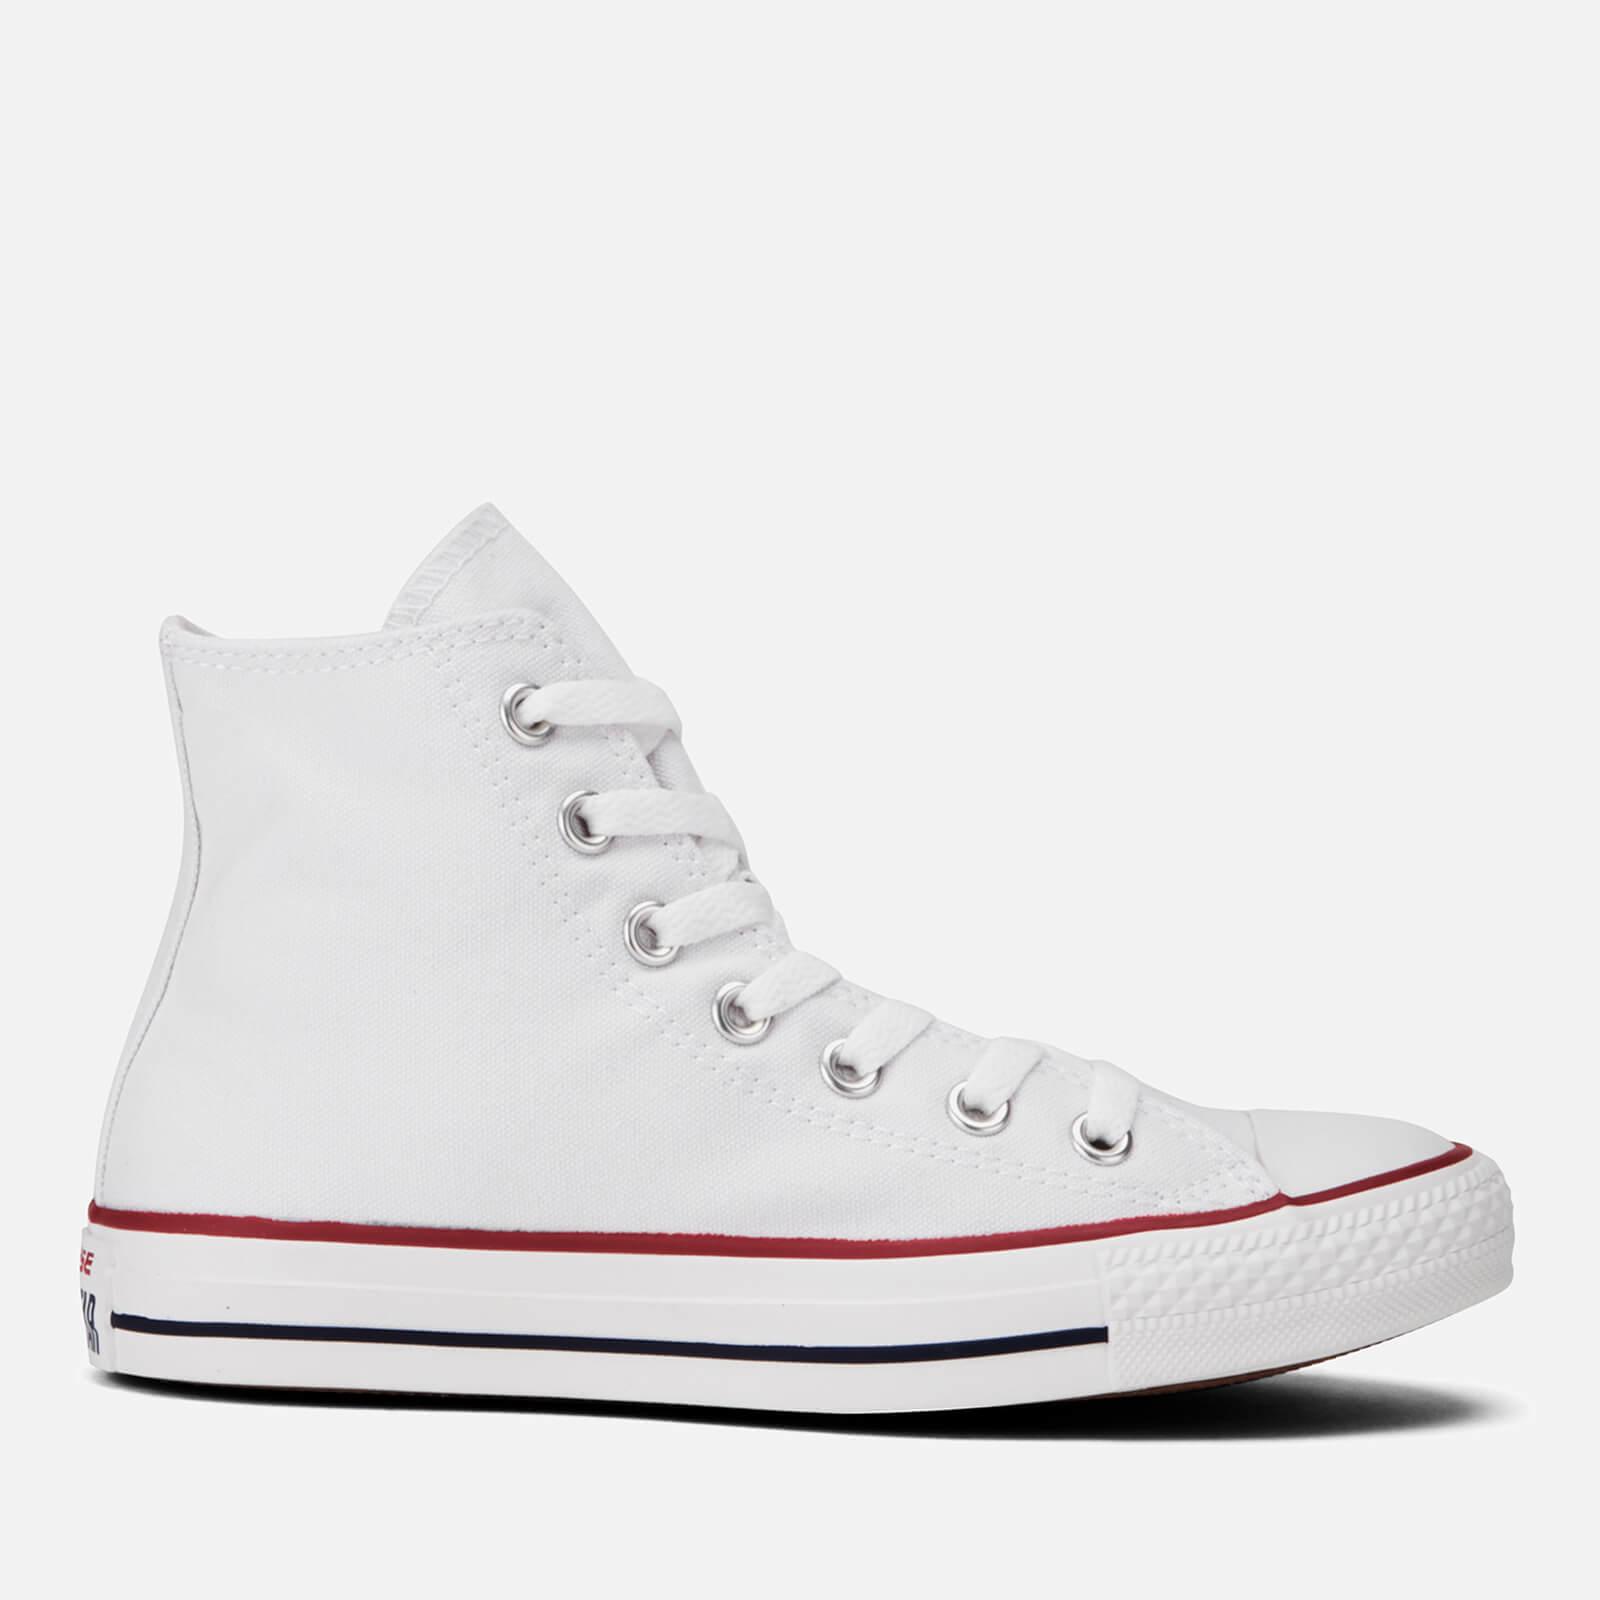 Converse Chuck Taylor All Star Hi-top Trainers | Lyst